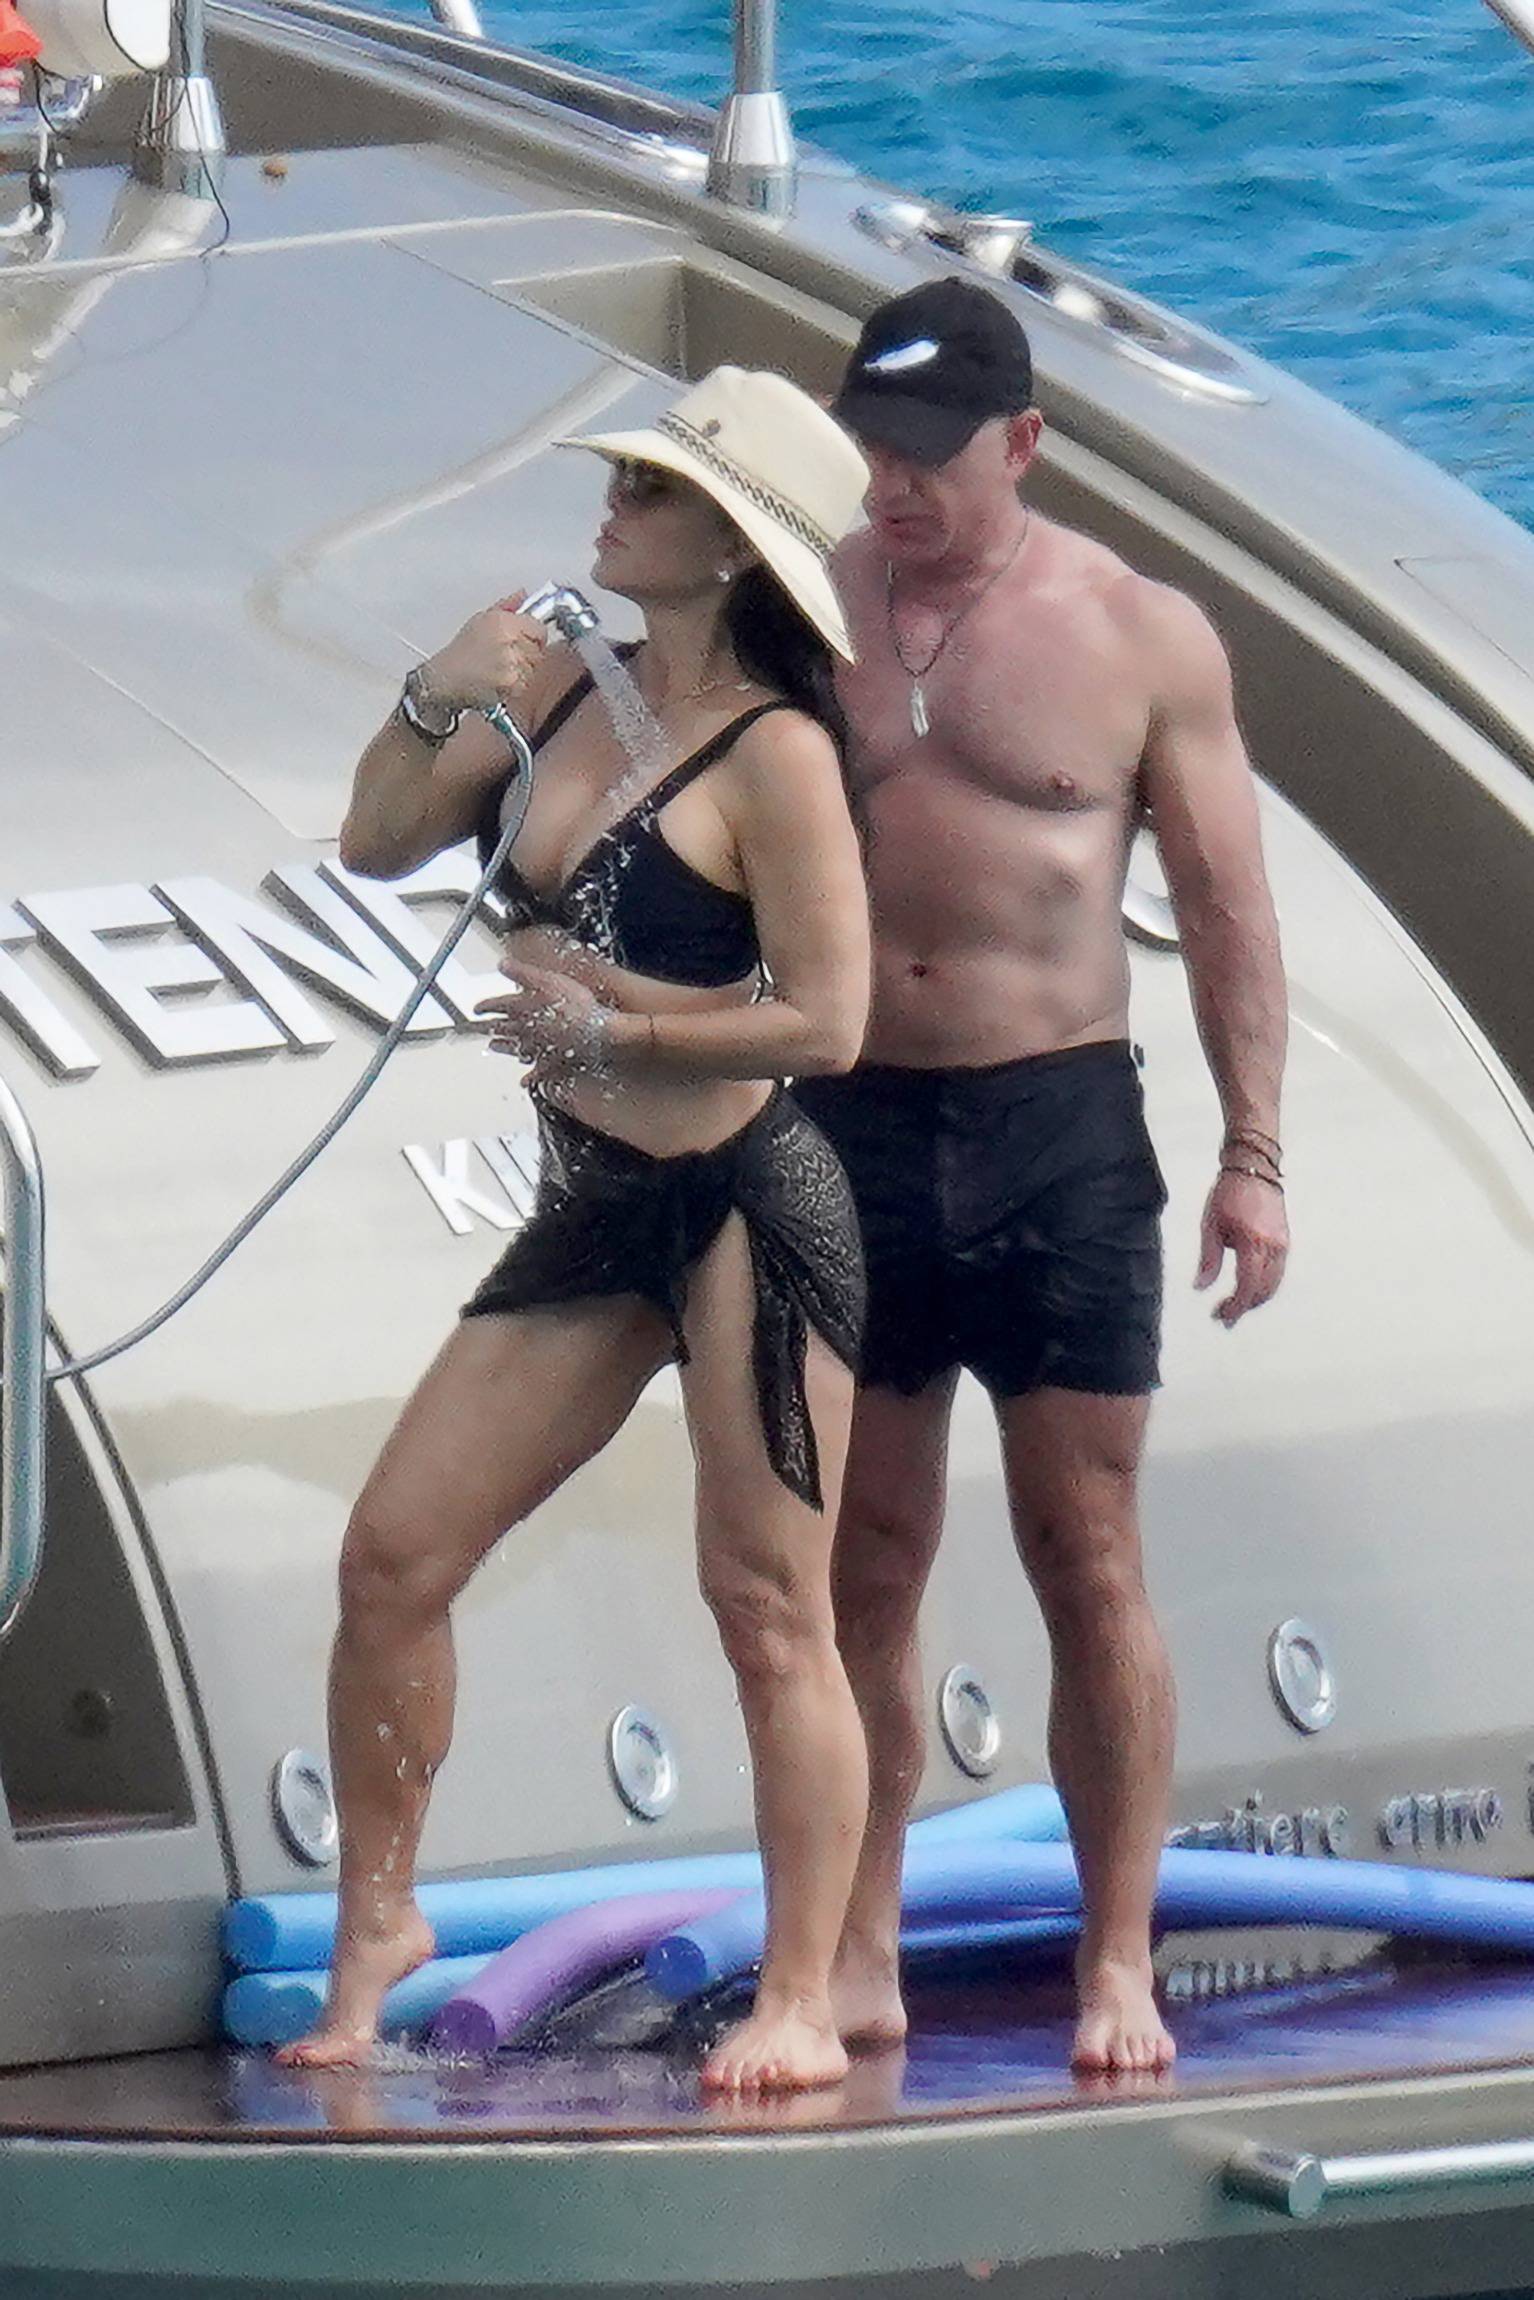 EXCLUSIVE: Billionaire beefcake Jeff Bezos and Lauren Sanchez enjoy a boat day with their family during holiday season in St Barts